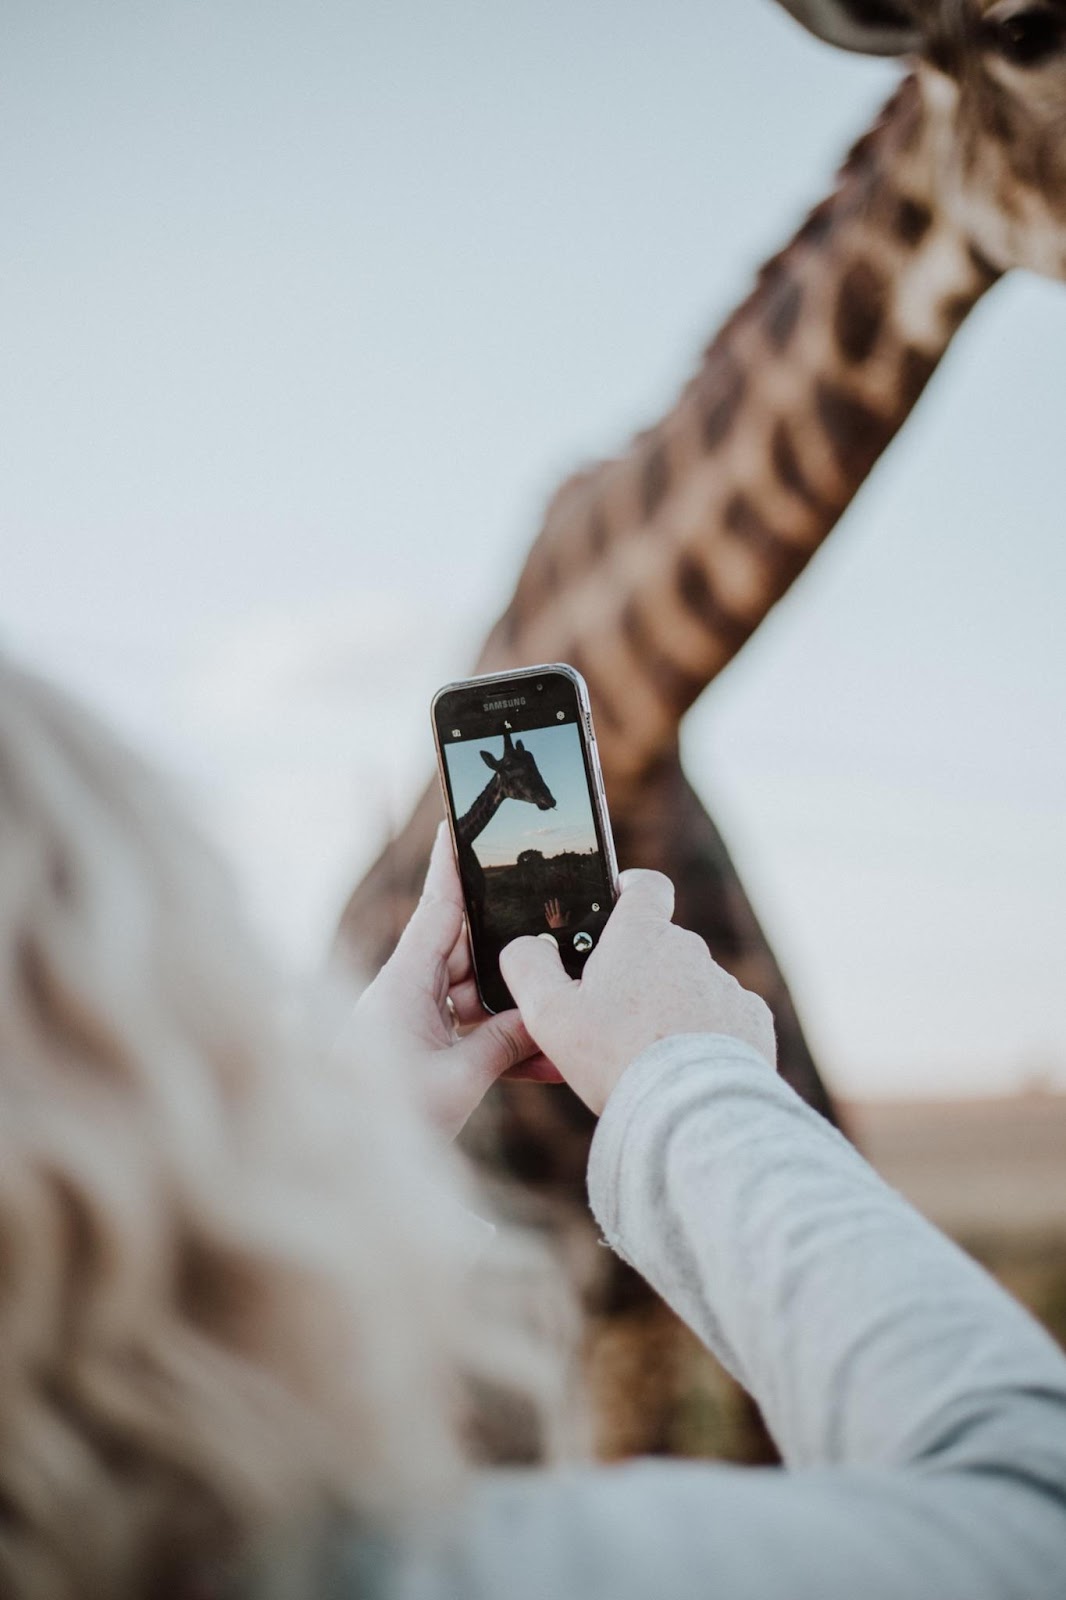 Make the most out of your cell phone's camera!